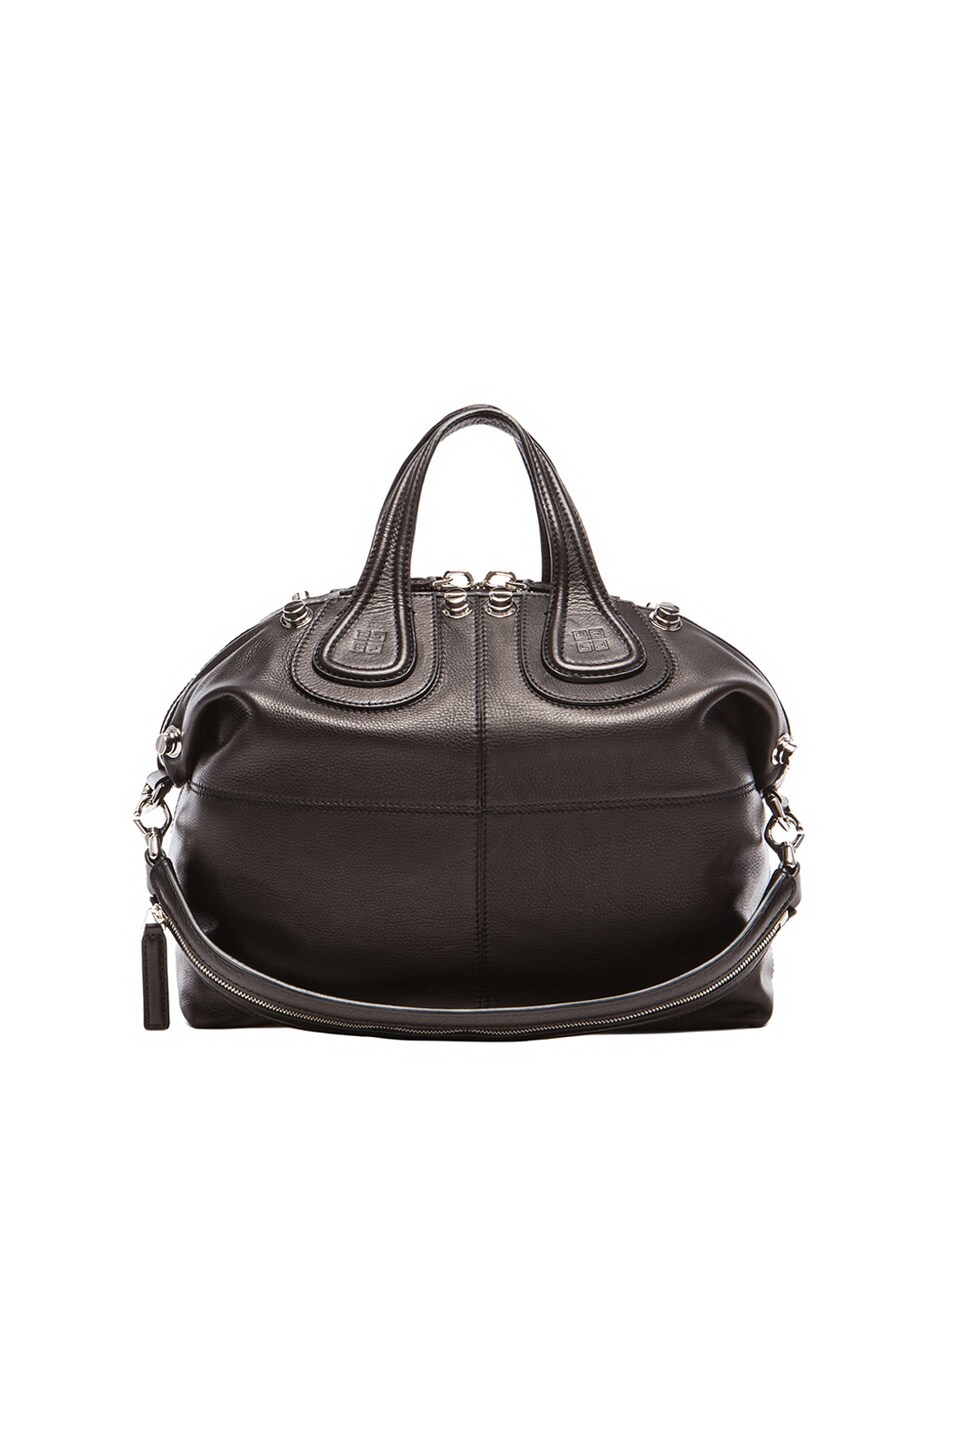 Givenchy Waxy Leather Medium Nightingale with Studs in Black | FWRD